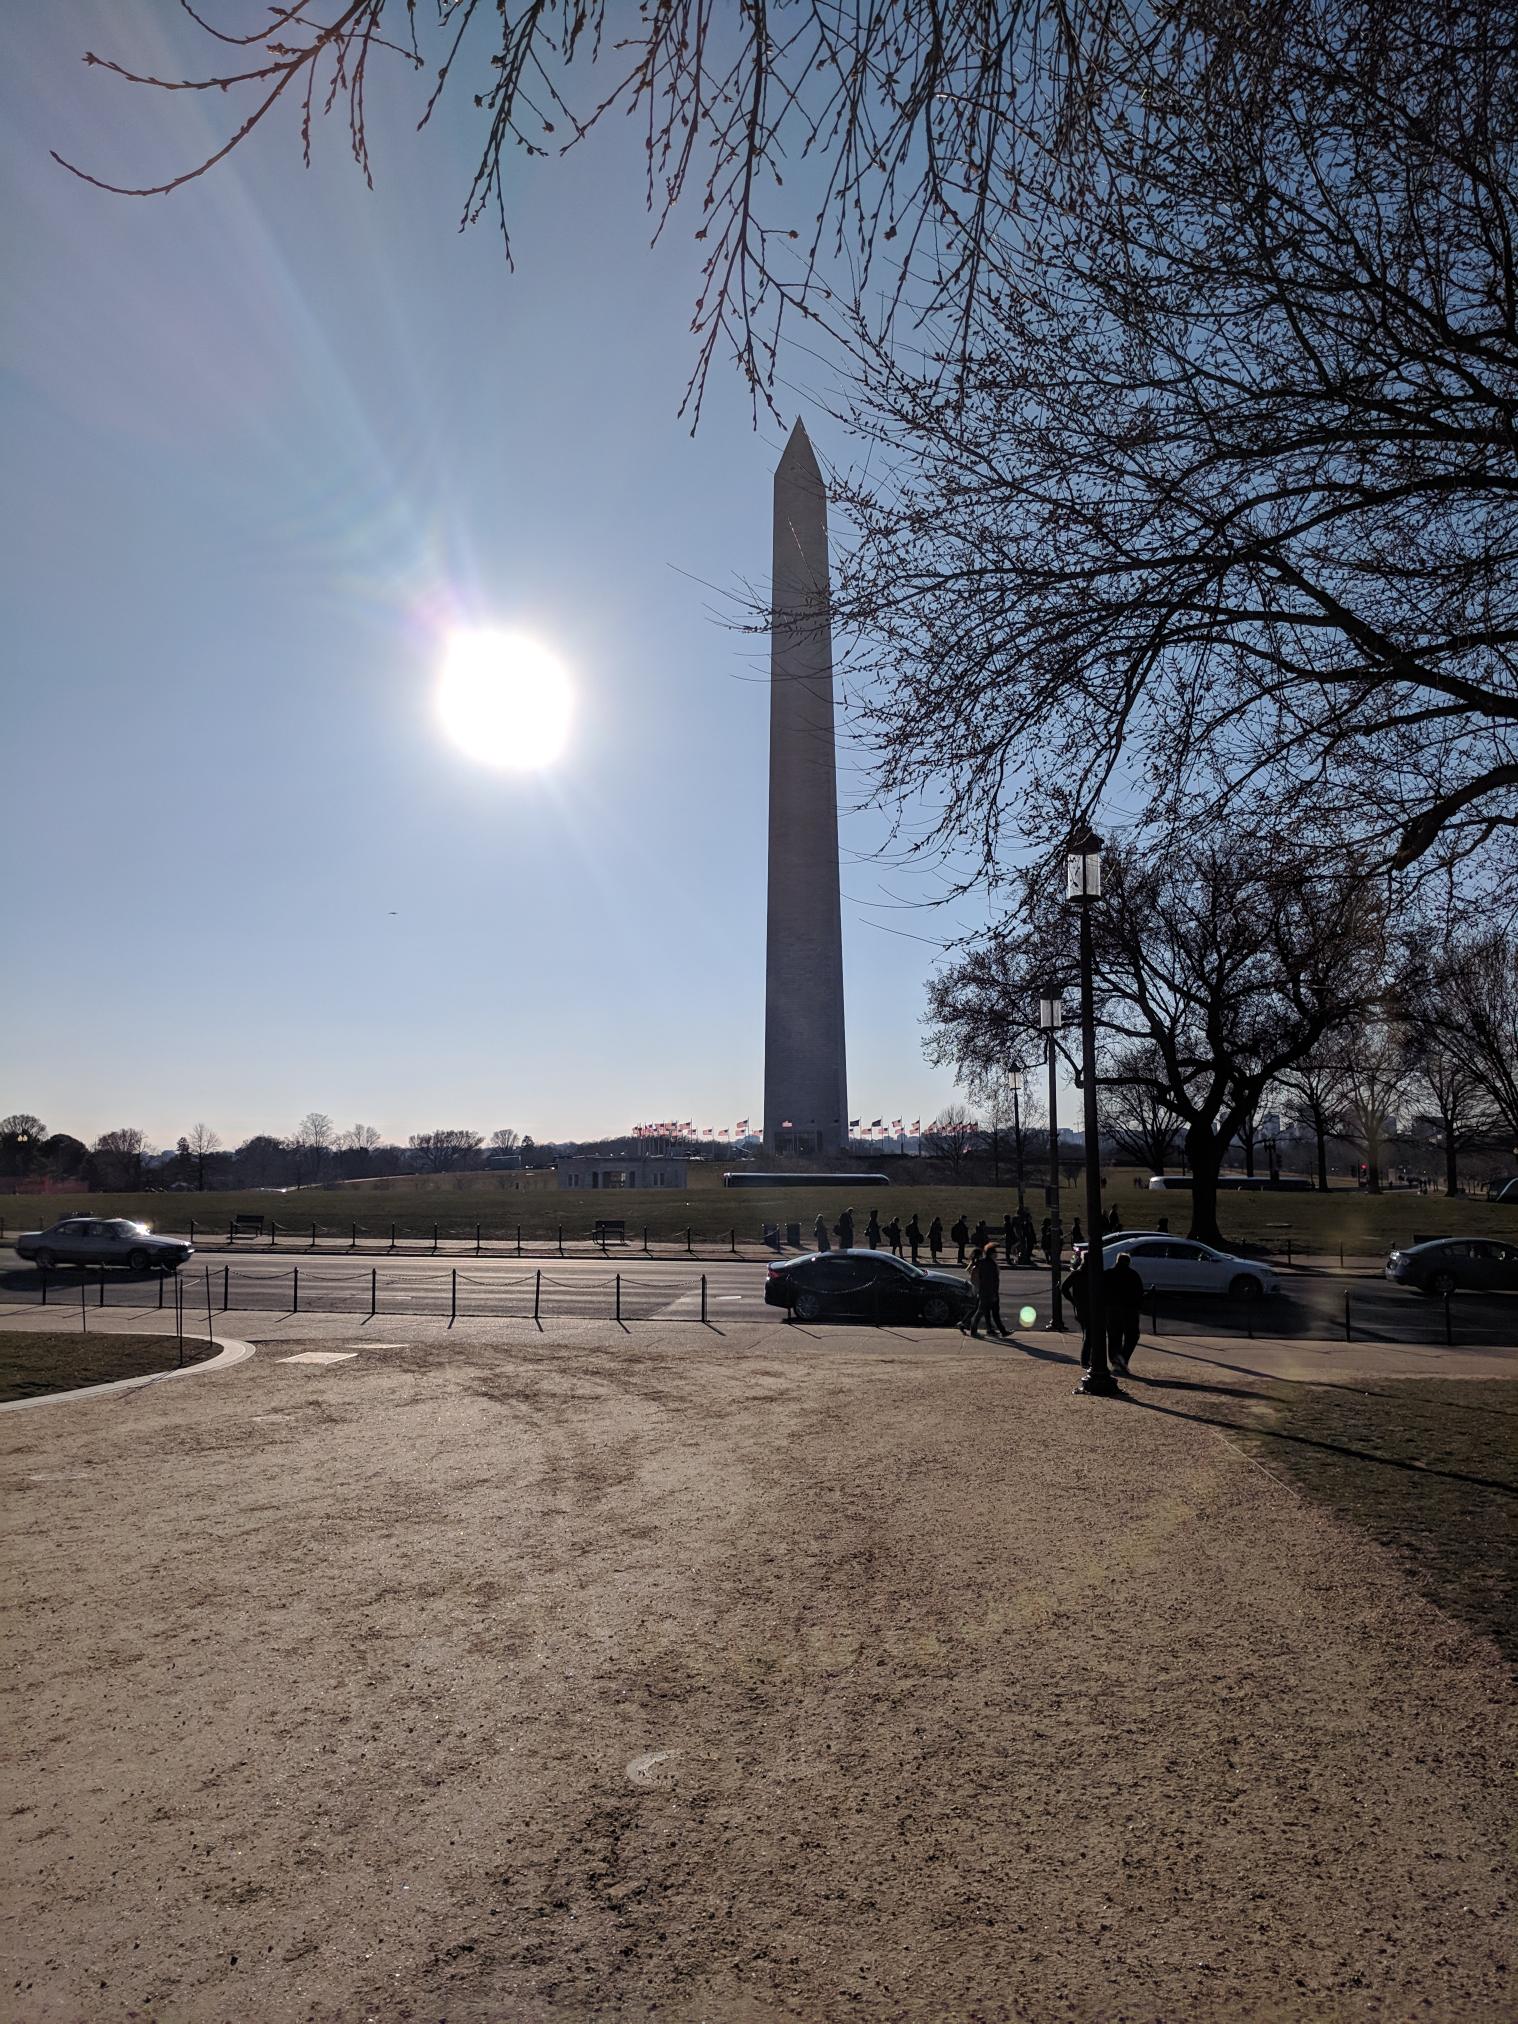 Picture of the Washington Monument from afar. The sun in shining behind the monument.